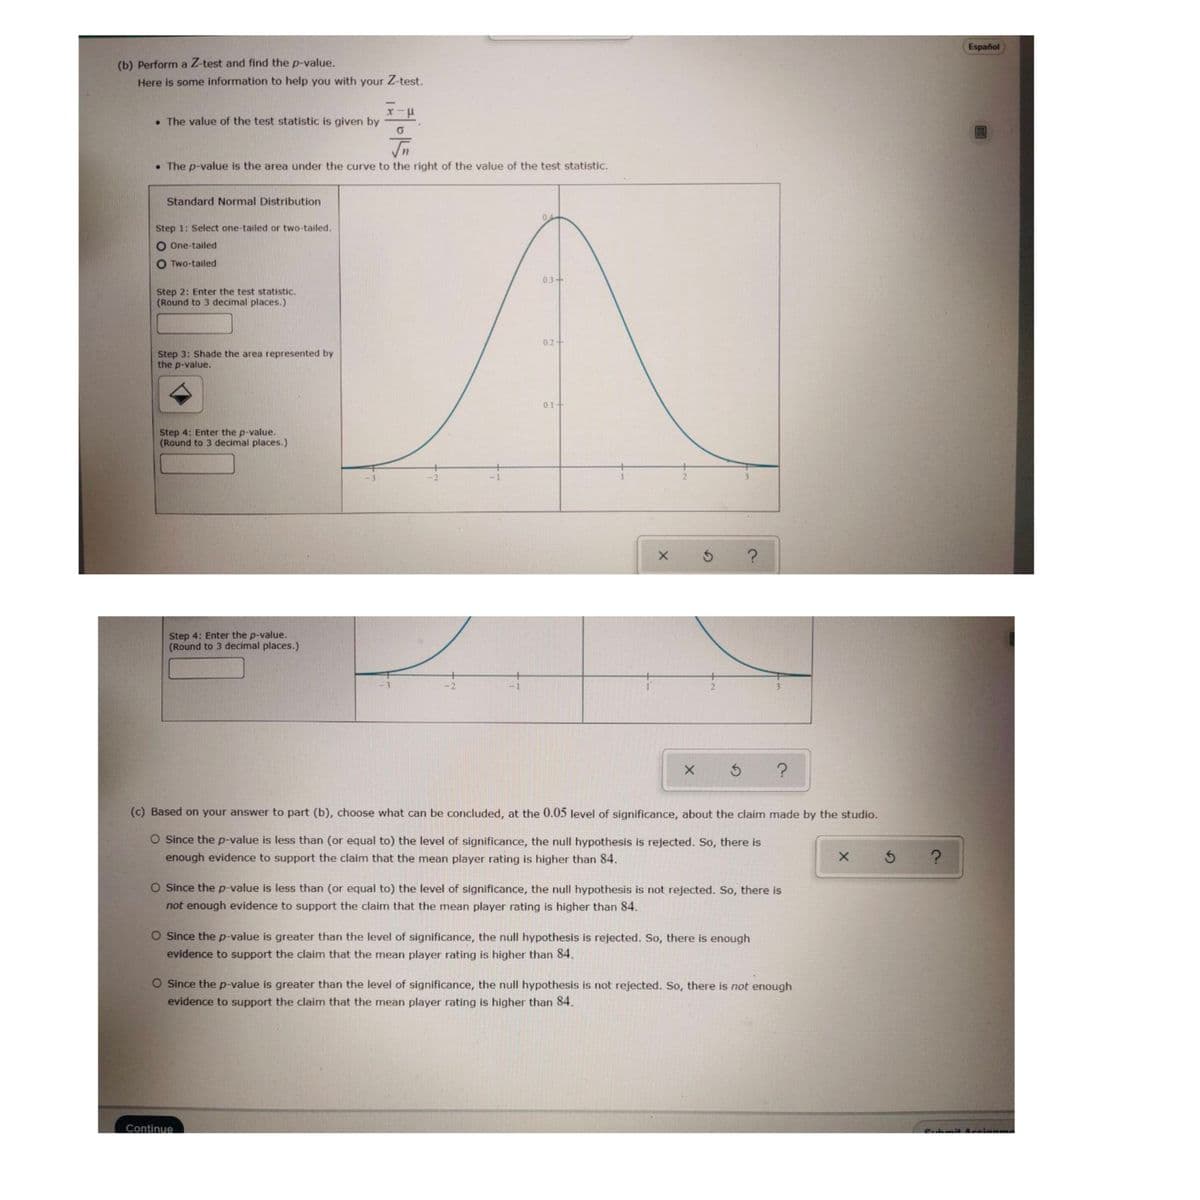 Español
(b) Perform a Z-test and find the p-value.
Here is some information to help you with your Z-test.
• The value of the test statistic is given by
In
• The p-value is the area under the curve to the right of the value of the test statistic.
Standard Normal Distribution
0.
Step 1: Select one-tailed or two-tailed.
O One-tailed
O Two-tailed
0.3+
Step 2: Enter the test statistic.
(Round to 3 decimal places.)
0.2
Step 3: Shade the area represented by
the p-value.
0.1+
Step 4: Enter the p-value.
(Round to 3 decimal places.)
-2
Step 4: Enter the p-value.
(Round to 3 decimal places.)
-2
(c) Based on your answer to part (b), choose what can be concluded, at the 0.05 level of significance, about the claim made by the studio.
O Since the p-value is less than (or equal to) the level of significance, the null hypothesis is rejected. So, there is
enough evidence to support the claim that the mean player rating is higher than 84.
O Since the p-value is less than (or equal to) the level of significance, the null hypothesis is not rejected. So, there is
not enough evidence to support the claim that the mean player rating is higher than 84.
O Since the p-value is greater than the level of significance, the null hypothesis is rejected. So, there is enough
evidence to support the claim that the mean player rating is higher than 84.
O Since the p-value is greater than the level of significance, the null hypothesis is not rejected. So, there is not enough
evidence to support the claim that the mean player rating is higher than 84.
Submit Accianme
Continue
